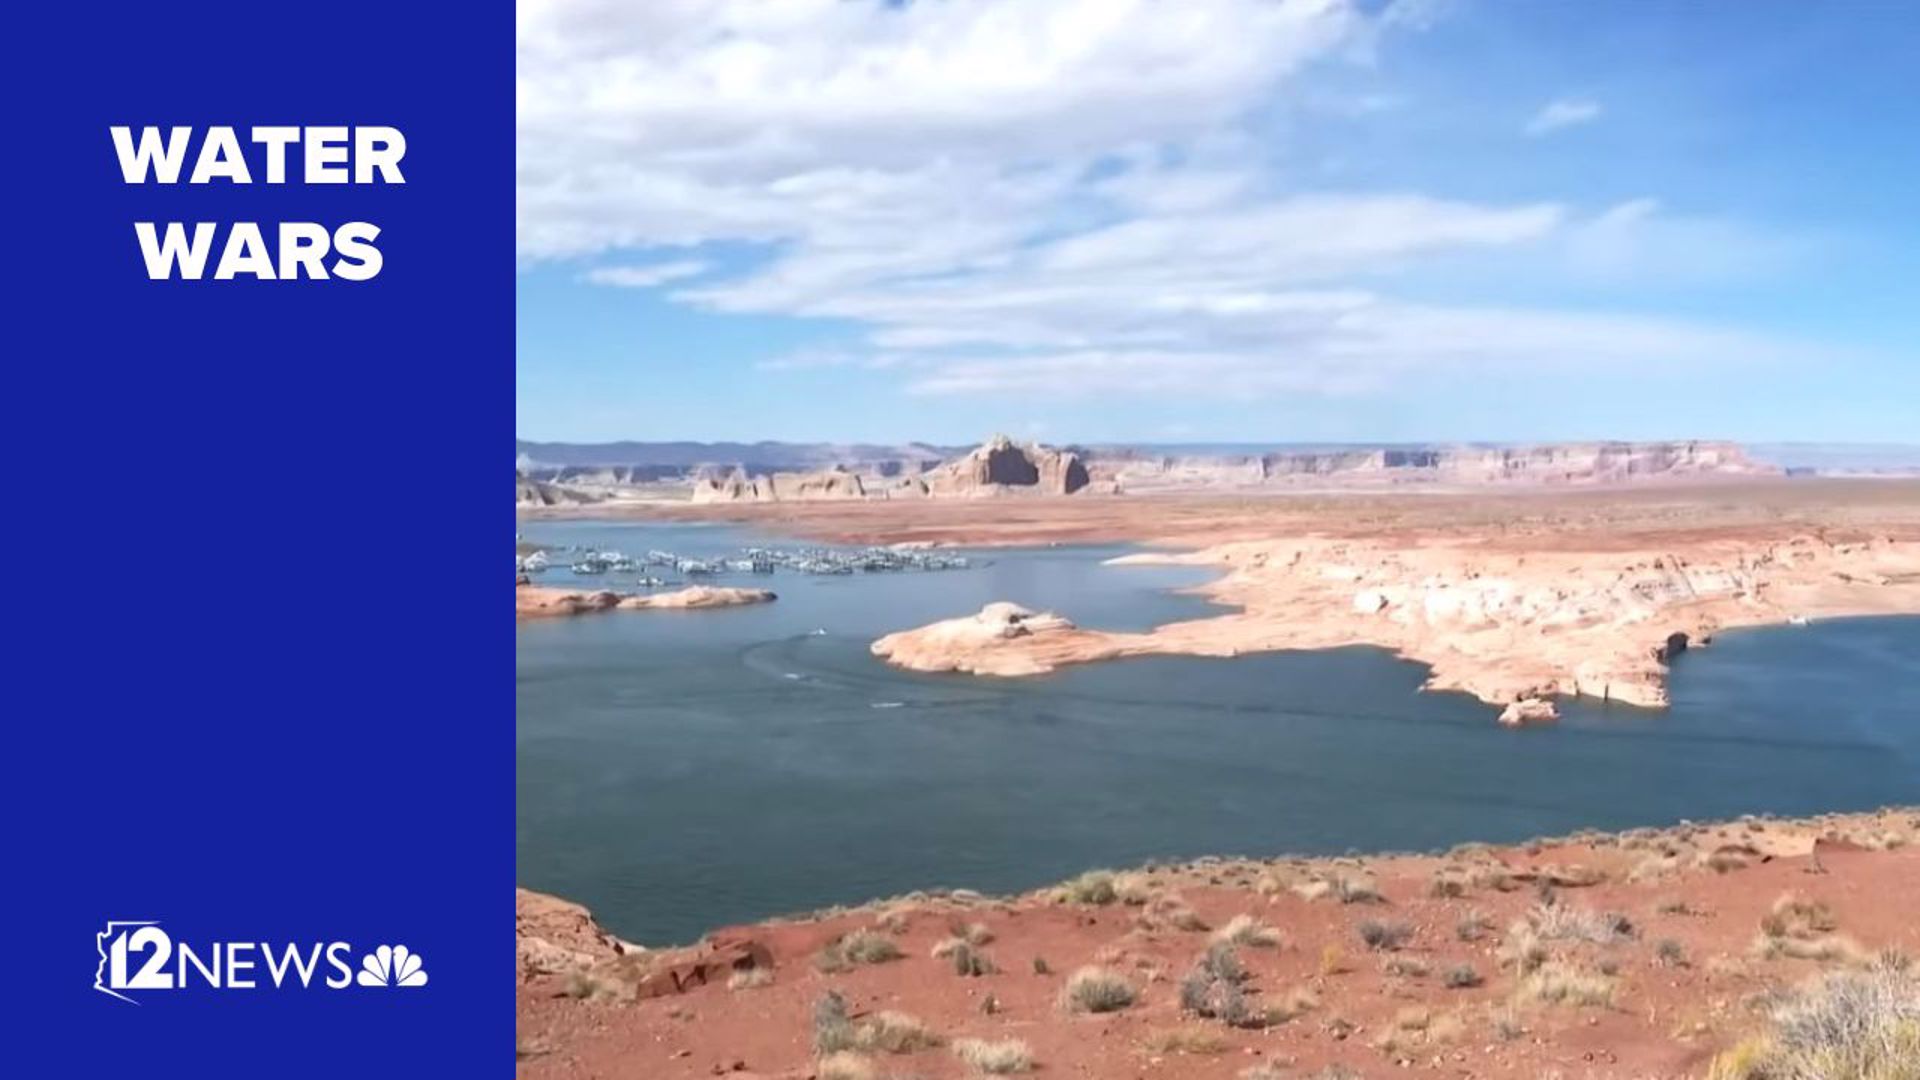 With falling water levels in Lake Powell threatening the town's water supply, there may be a fix coming.